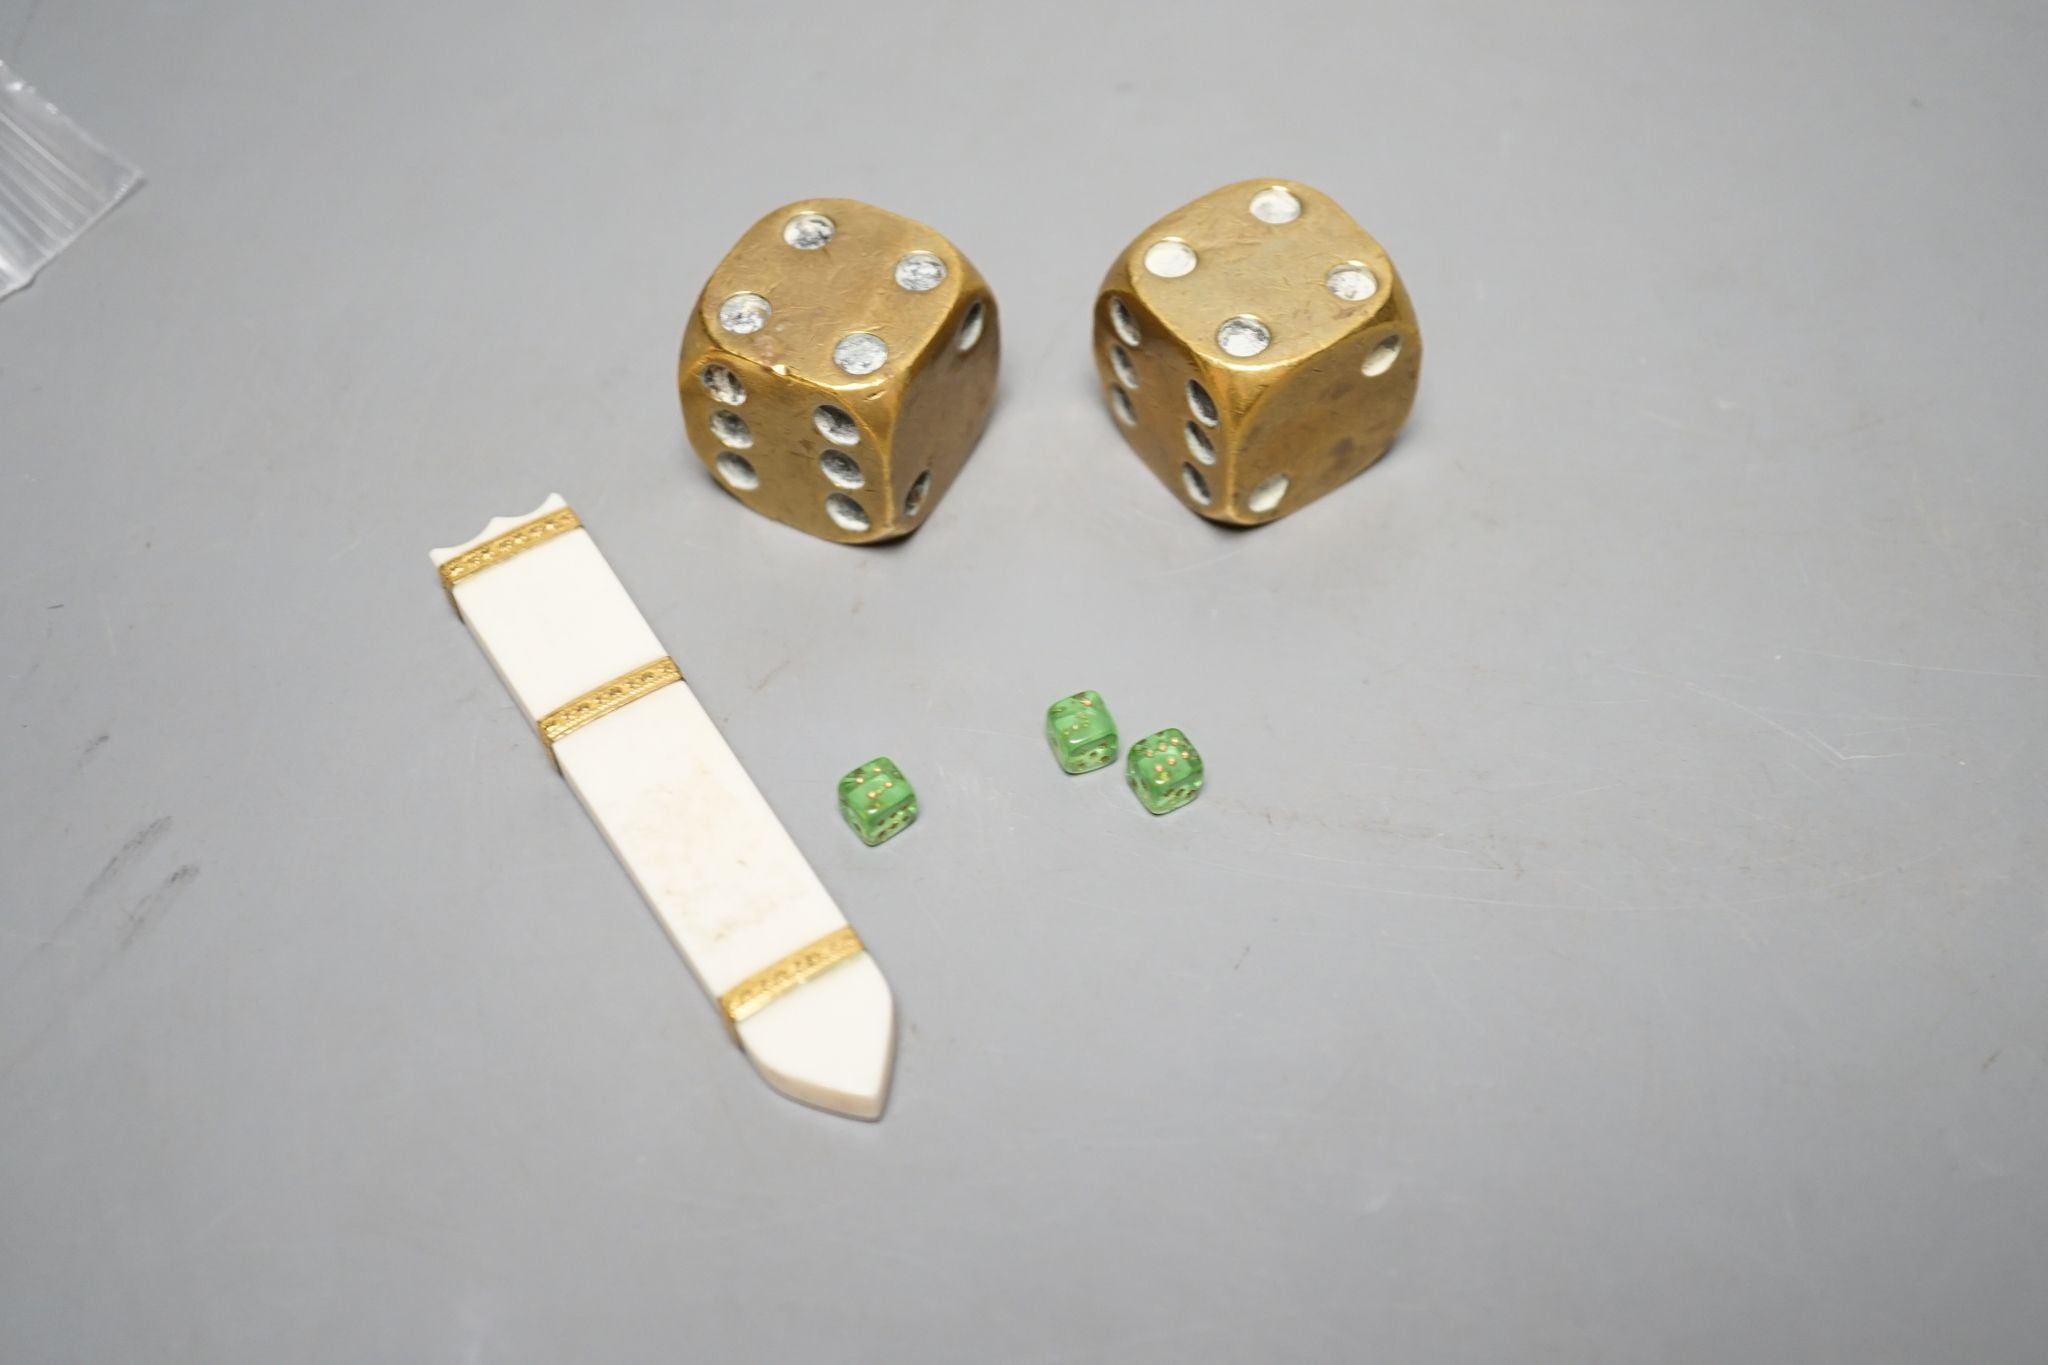 A late 18th century ivory and gold mounted needle case, two brass dice and three mini dice